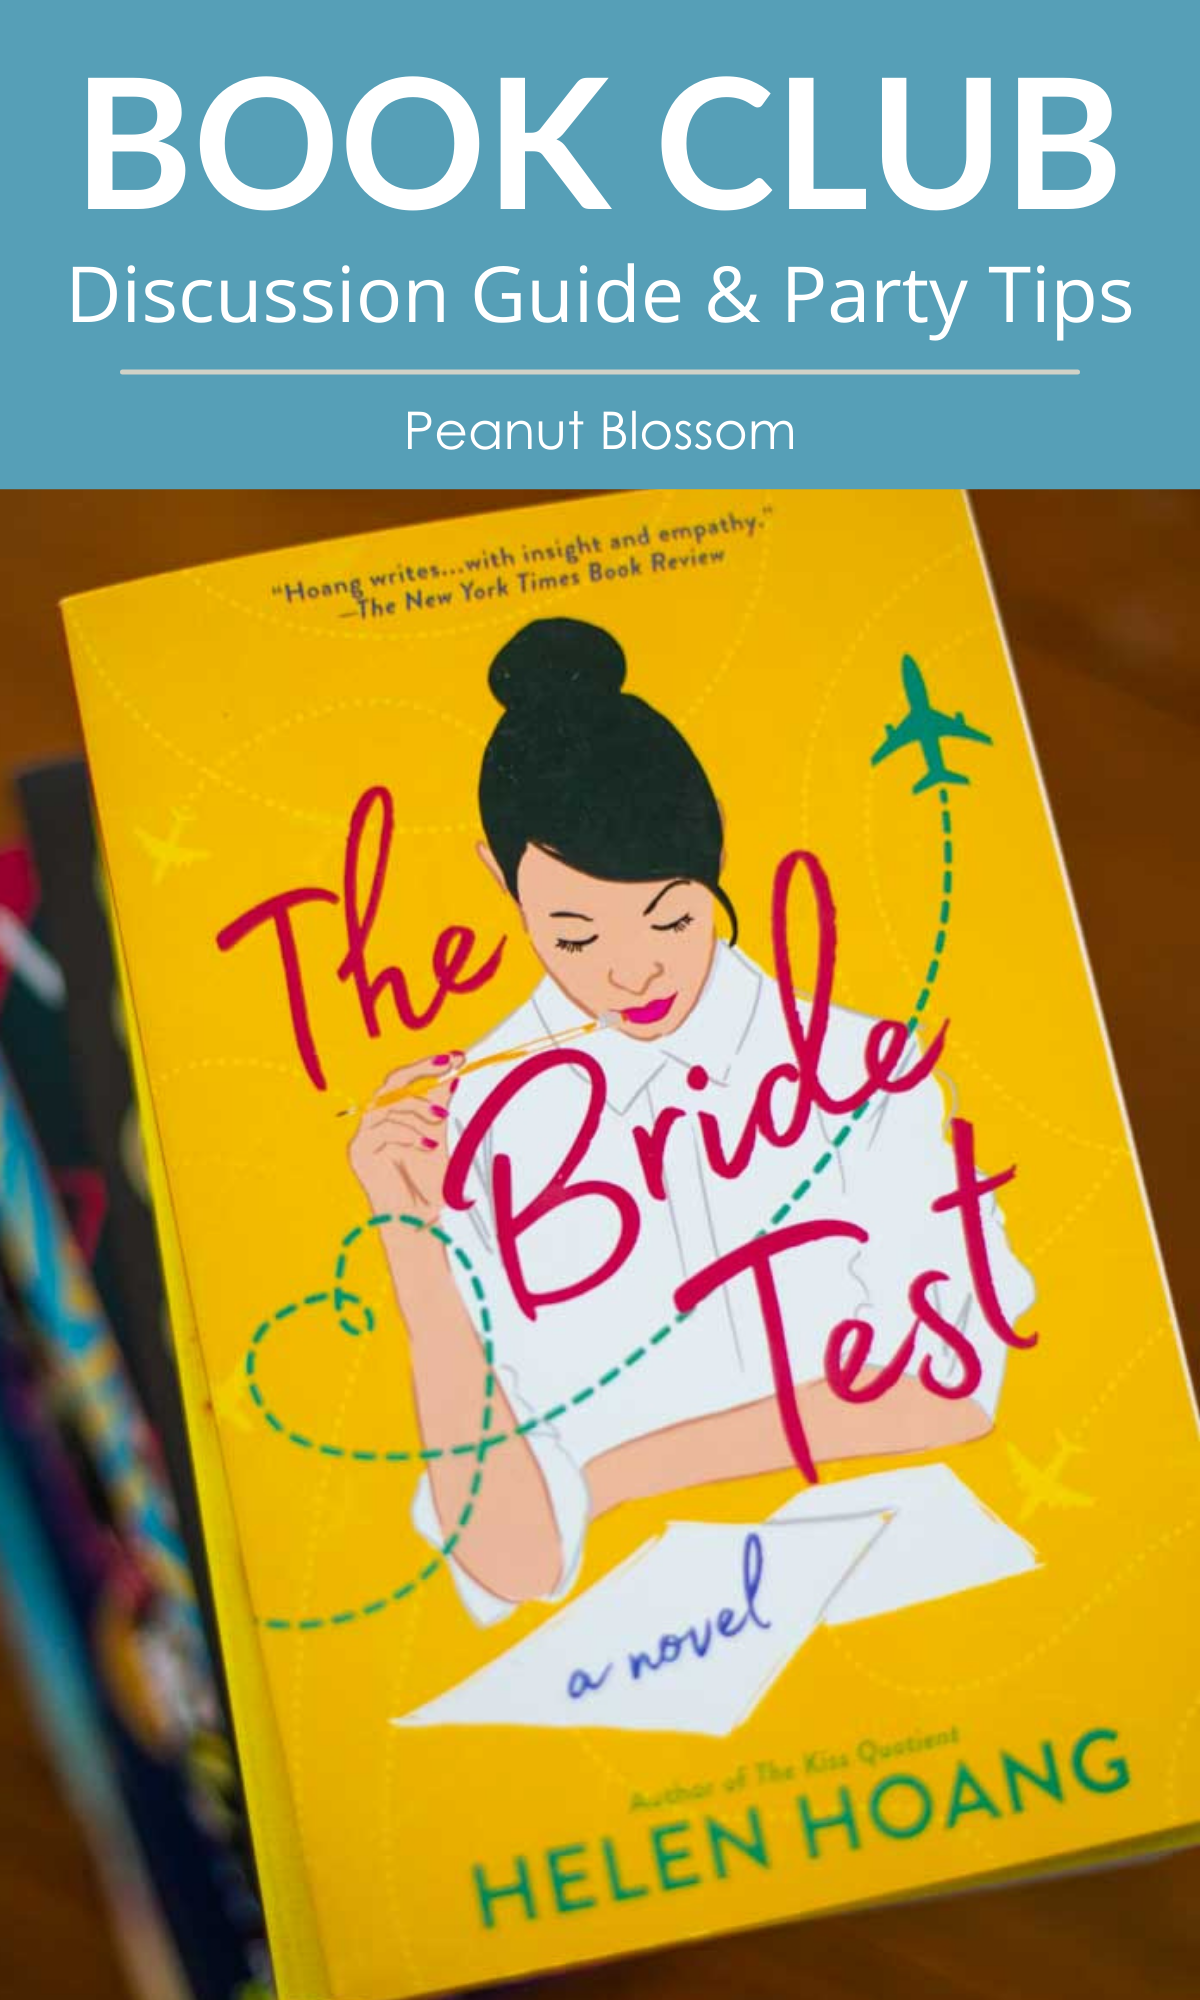 Book Club discussion guide for The Bride Test by Helen Hoang.